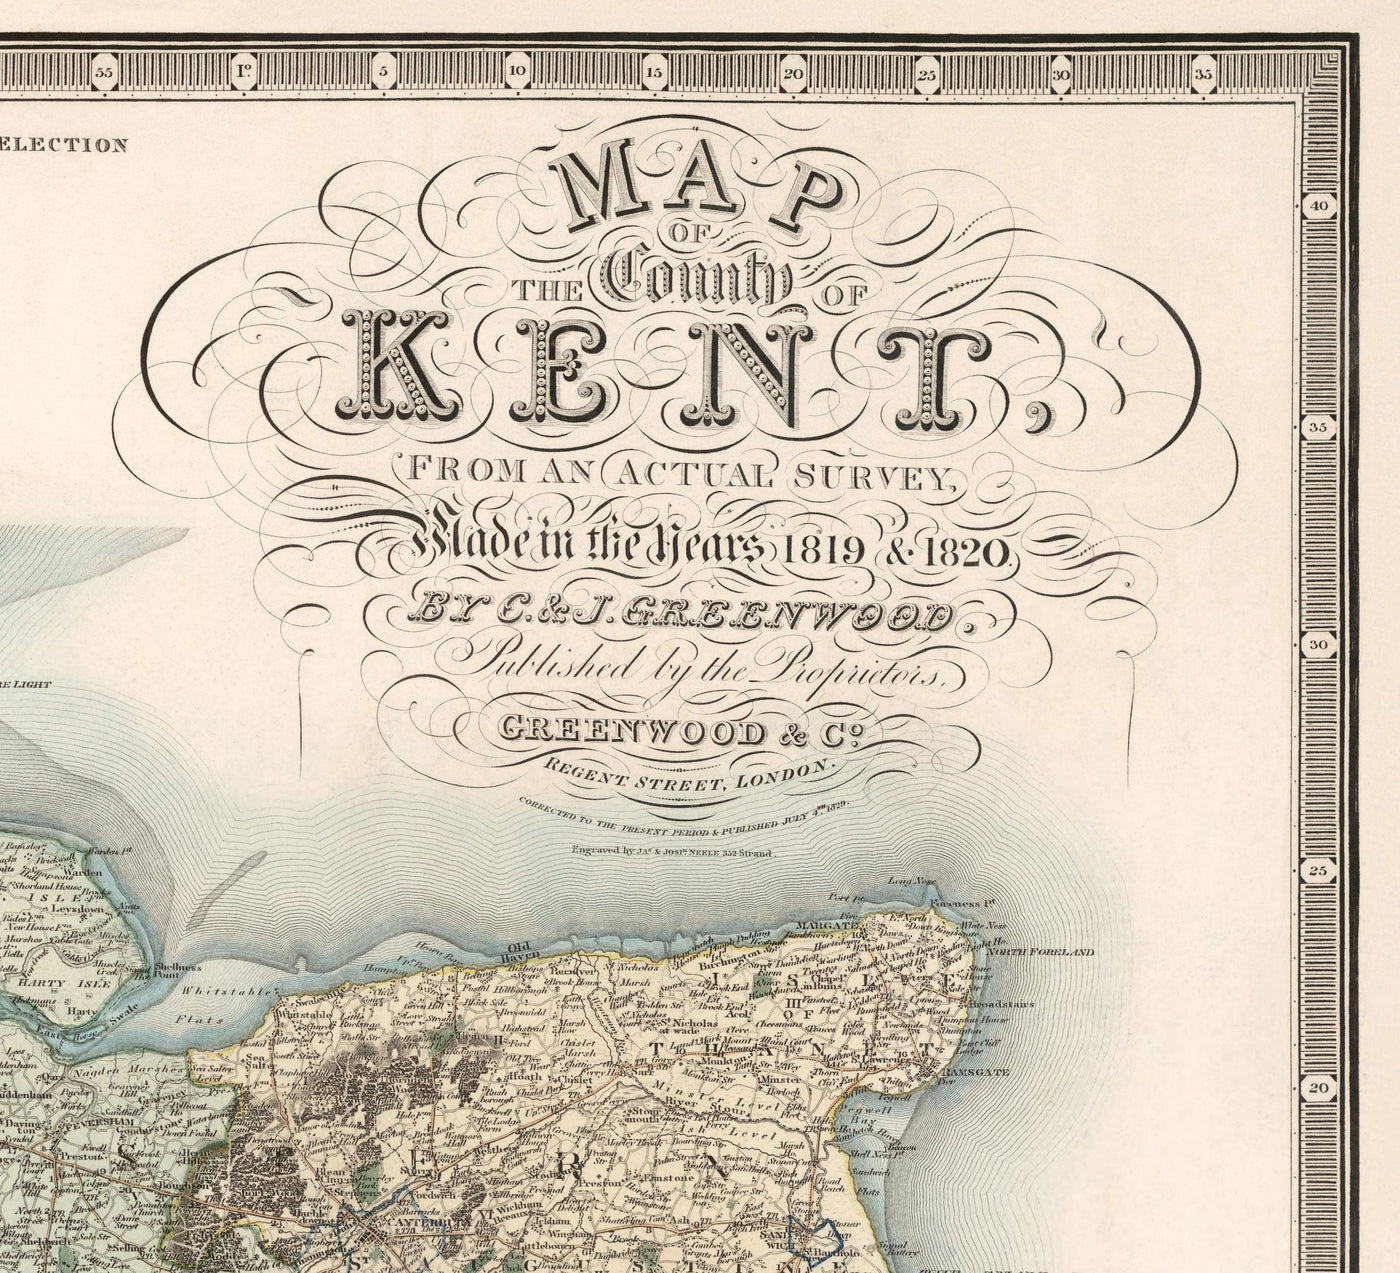 Old Map of Kent, 1829 by Greenwood & Co. - Canterbury, Maidstone, Bromley, Tunbridge, Margate